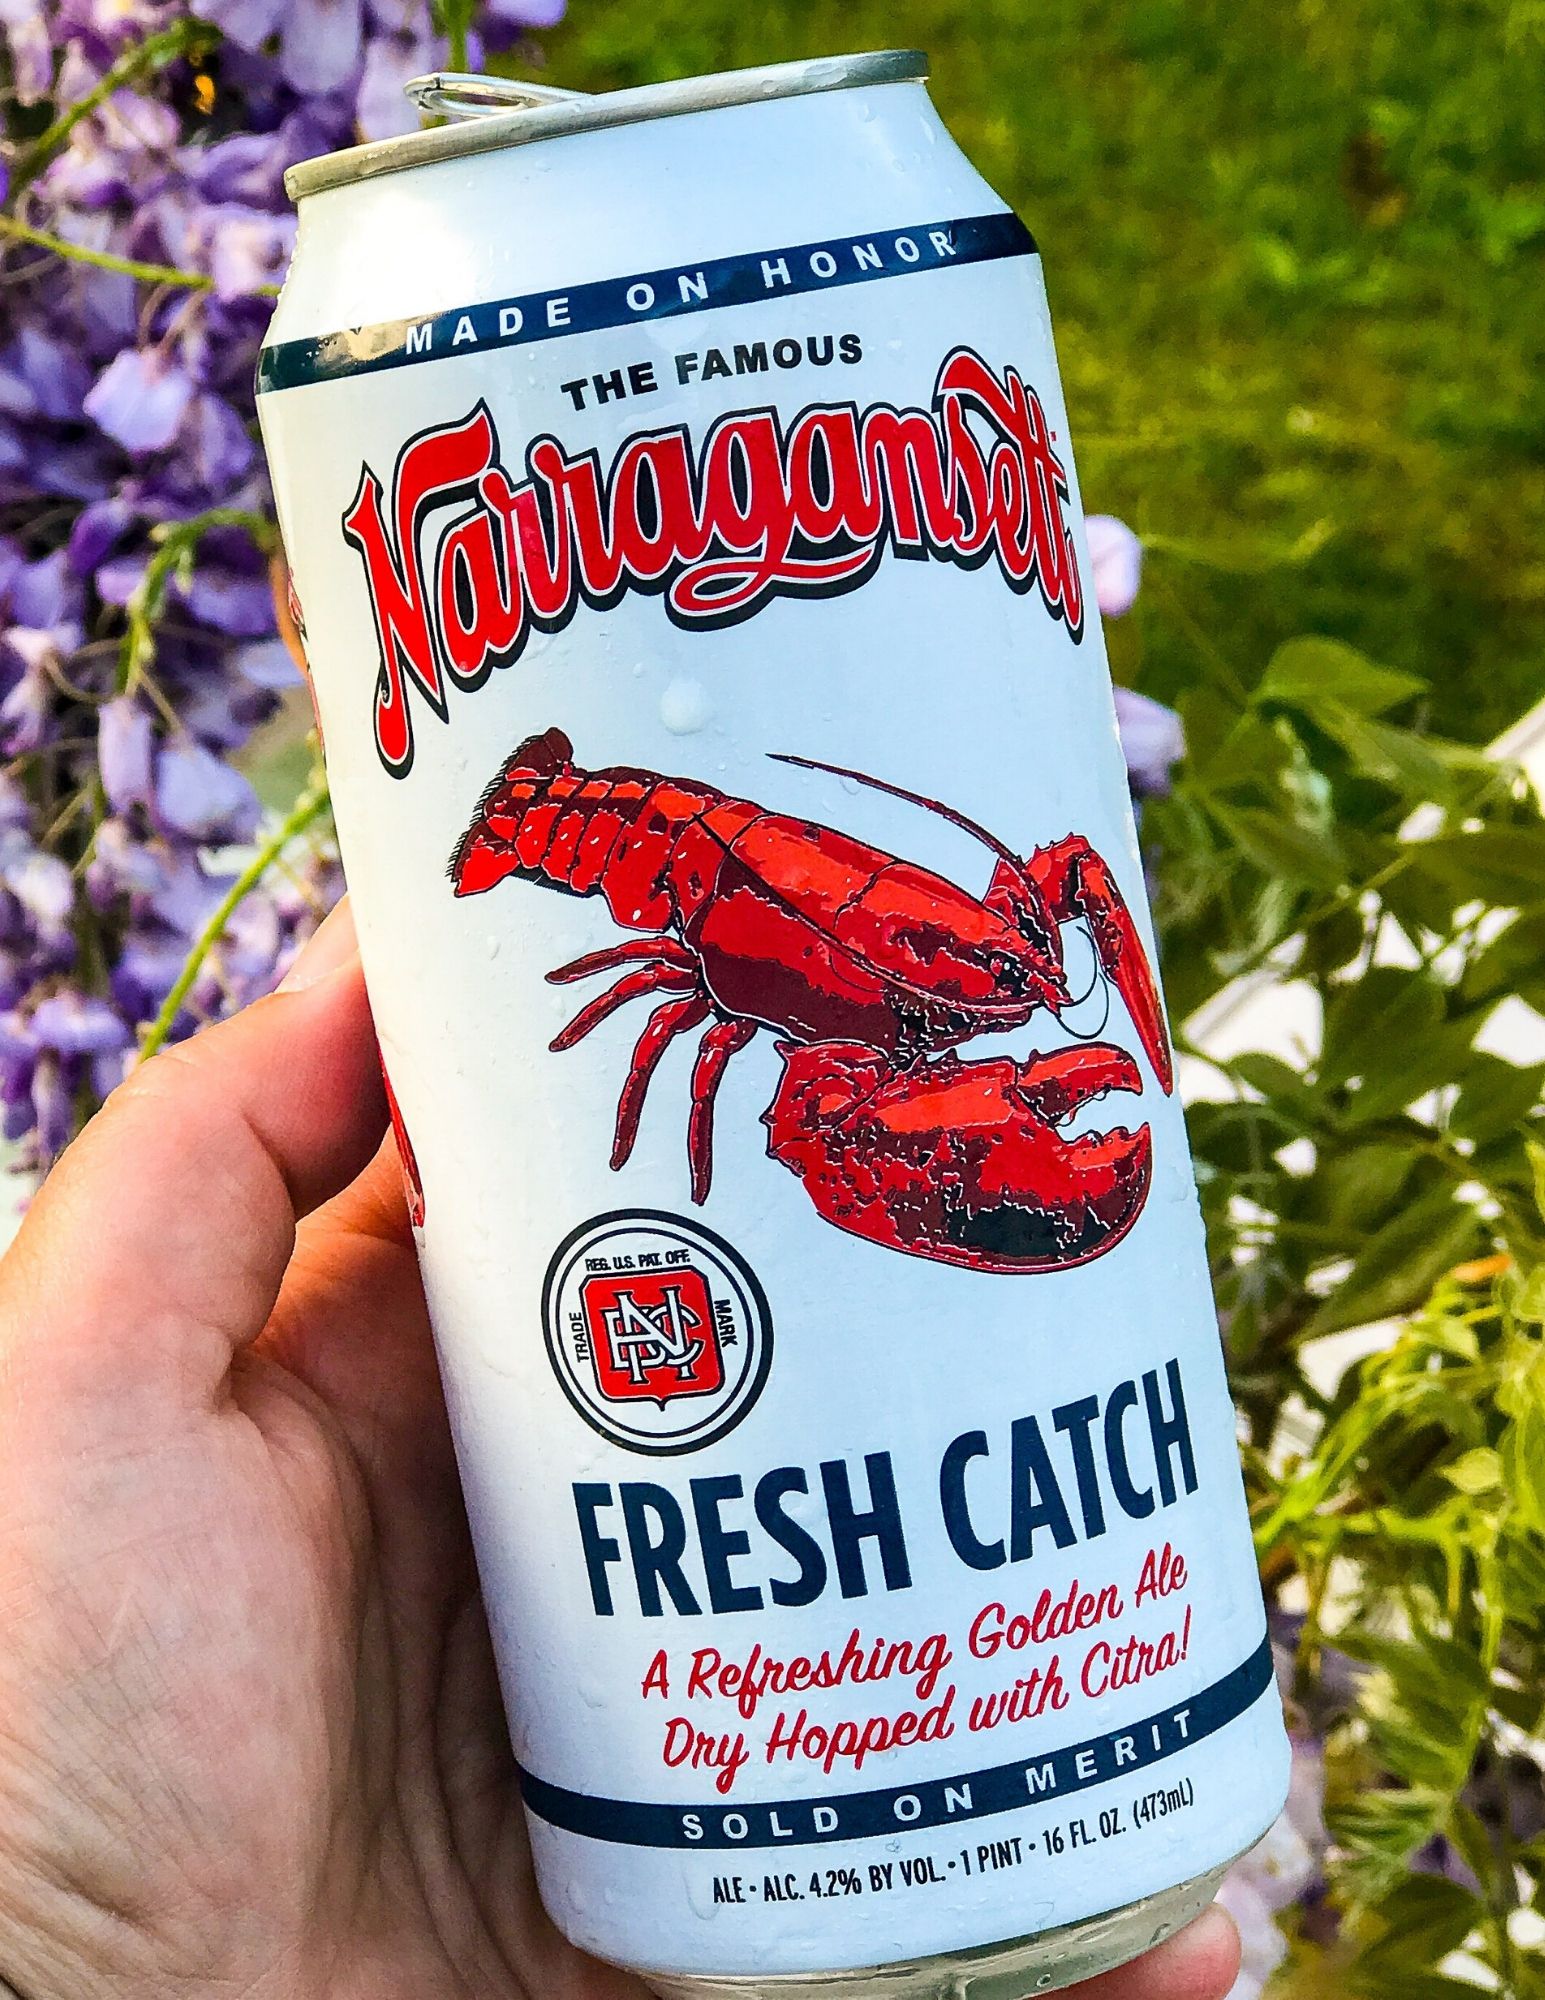 Grab a cold one from Gansett Beer